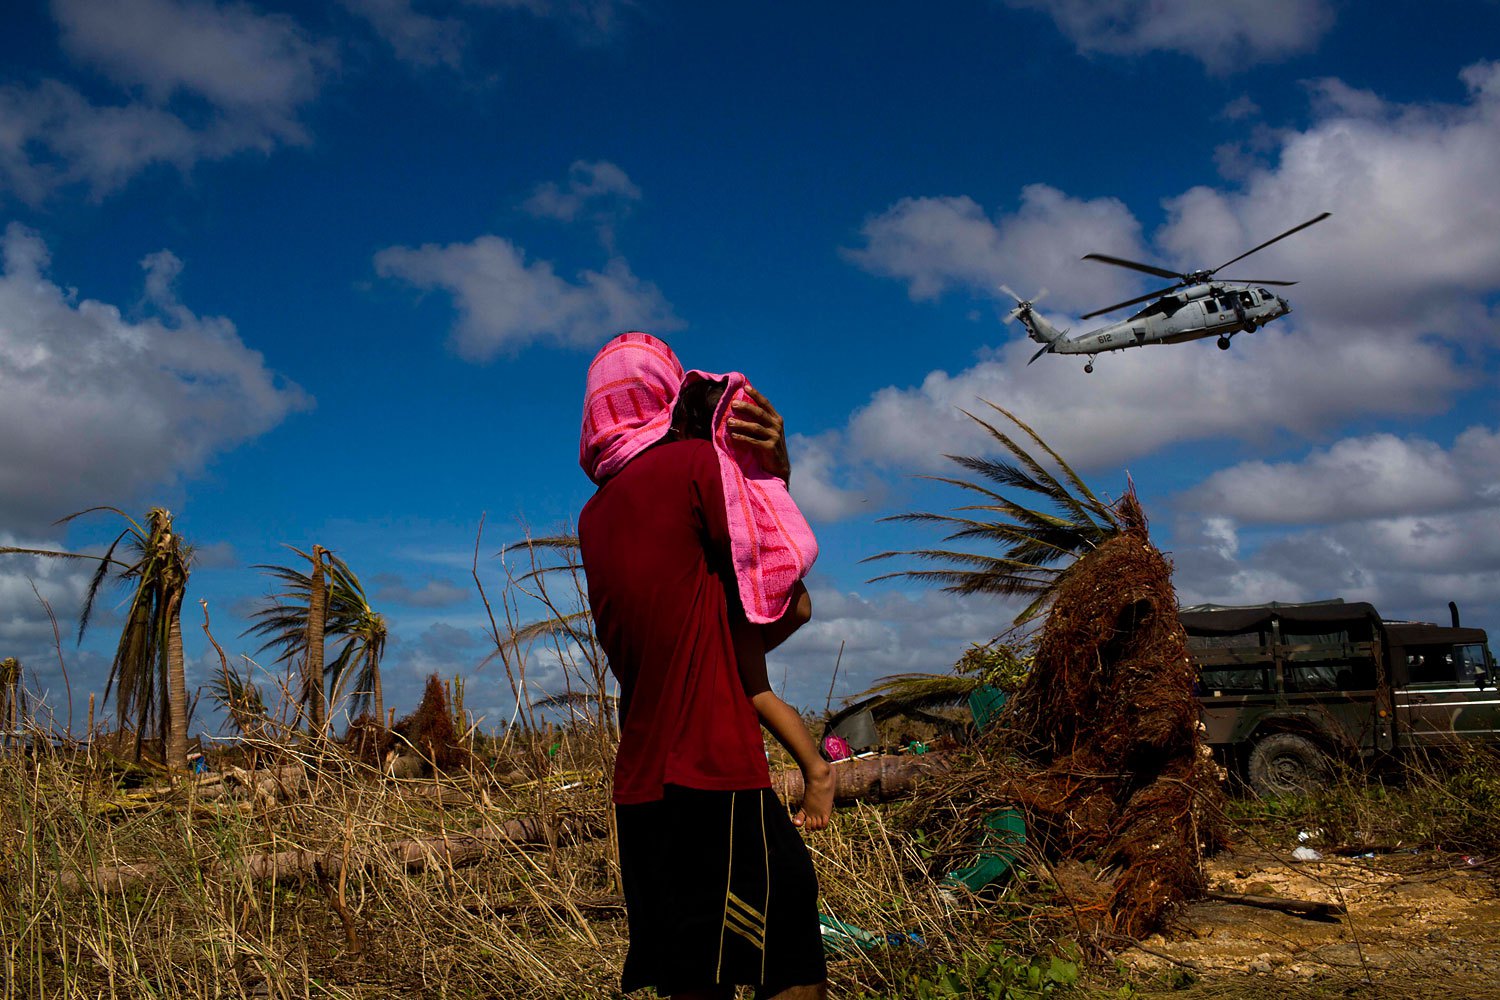 A Typhoon Haiyan survivor carries a child wrapped in a towel as he watches a helicopter landing to bring aid to the destroyed town of Guiuan, Samar Island, Philippines, November 15, 2013.